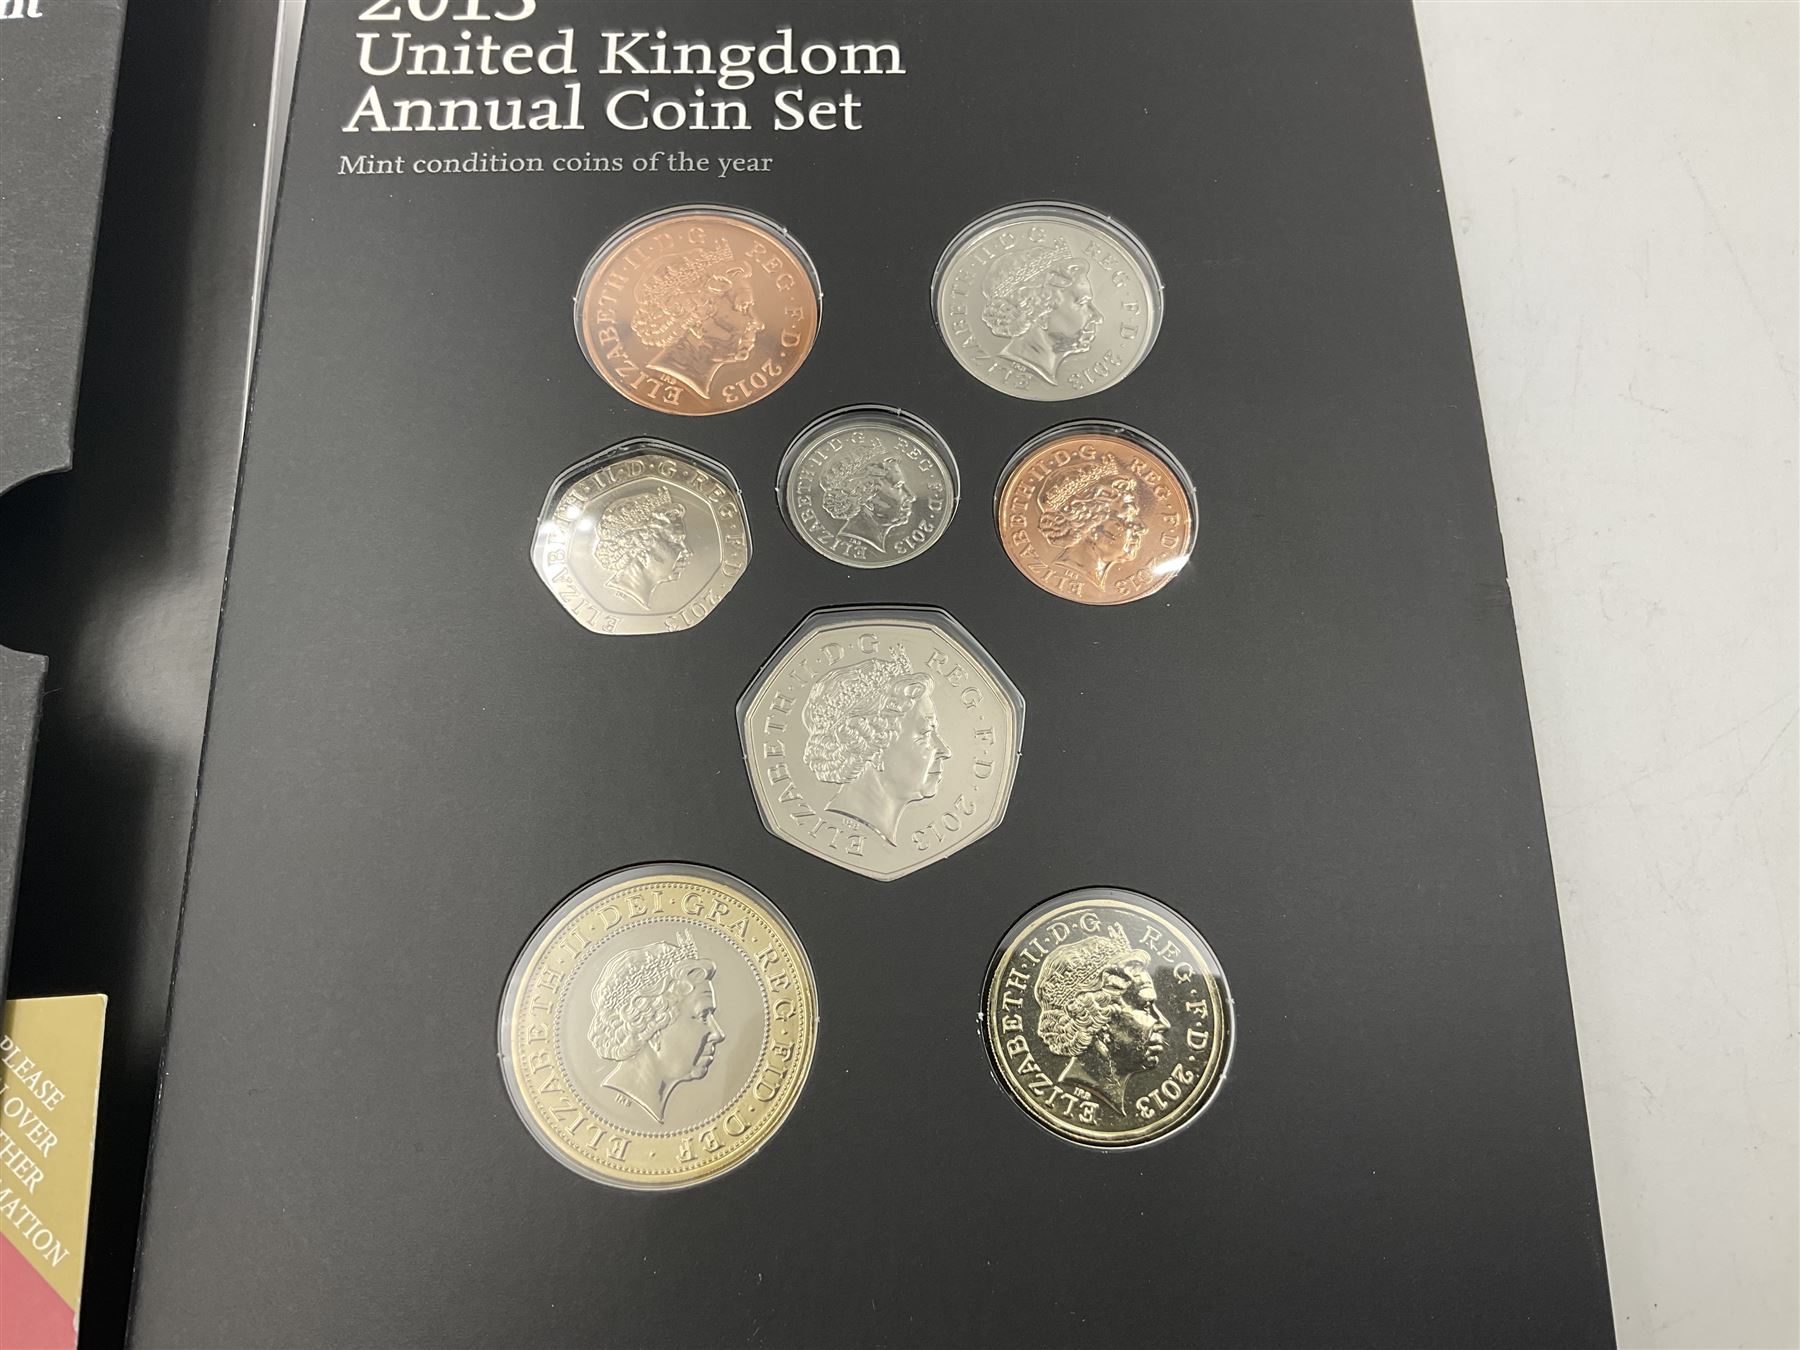 Two The Royal Mint United Kingdom Annual Coins Sets - Image 21 of 21